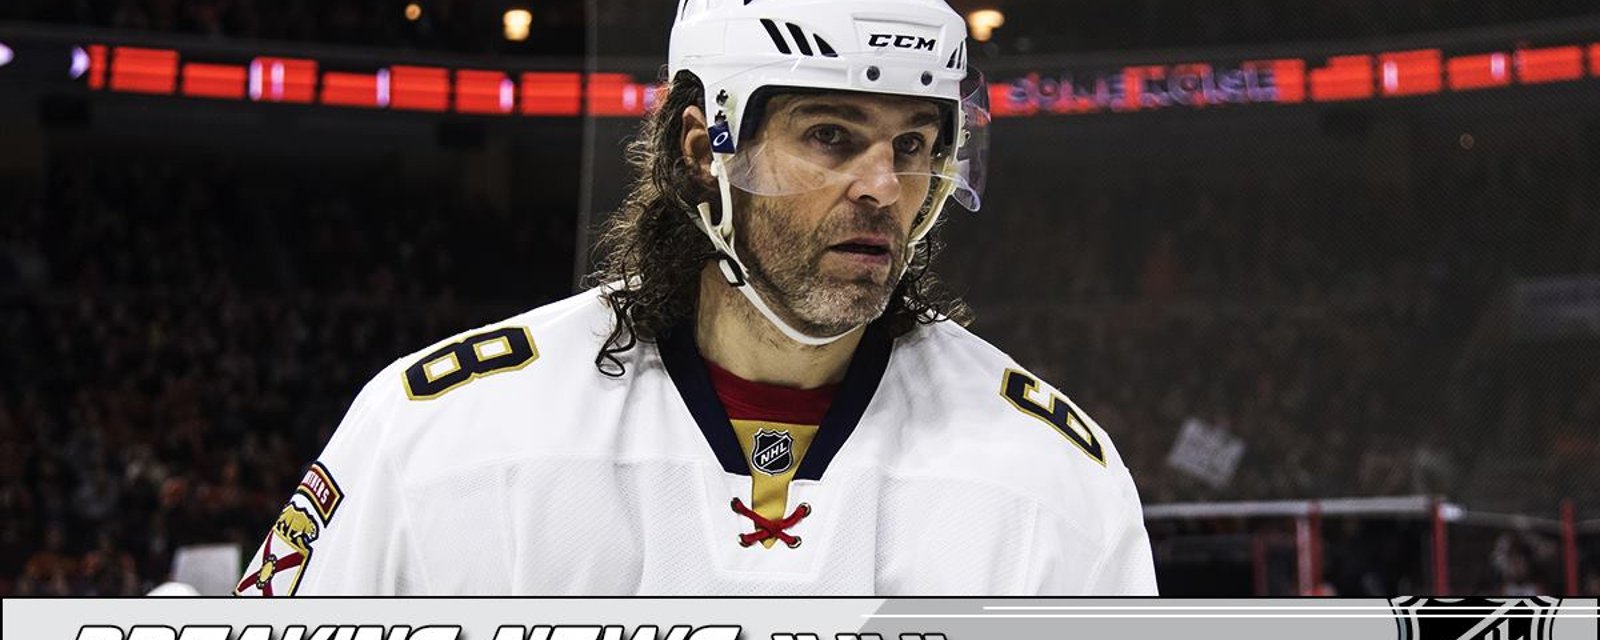 Breaking: Big update on Jagr's debut with the Flames.